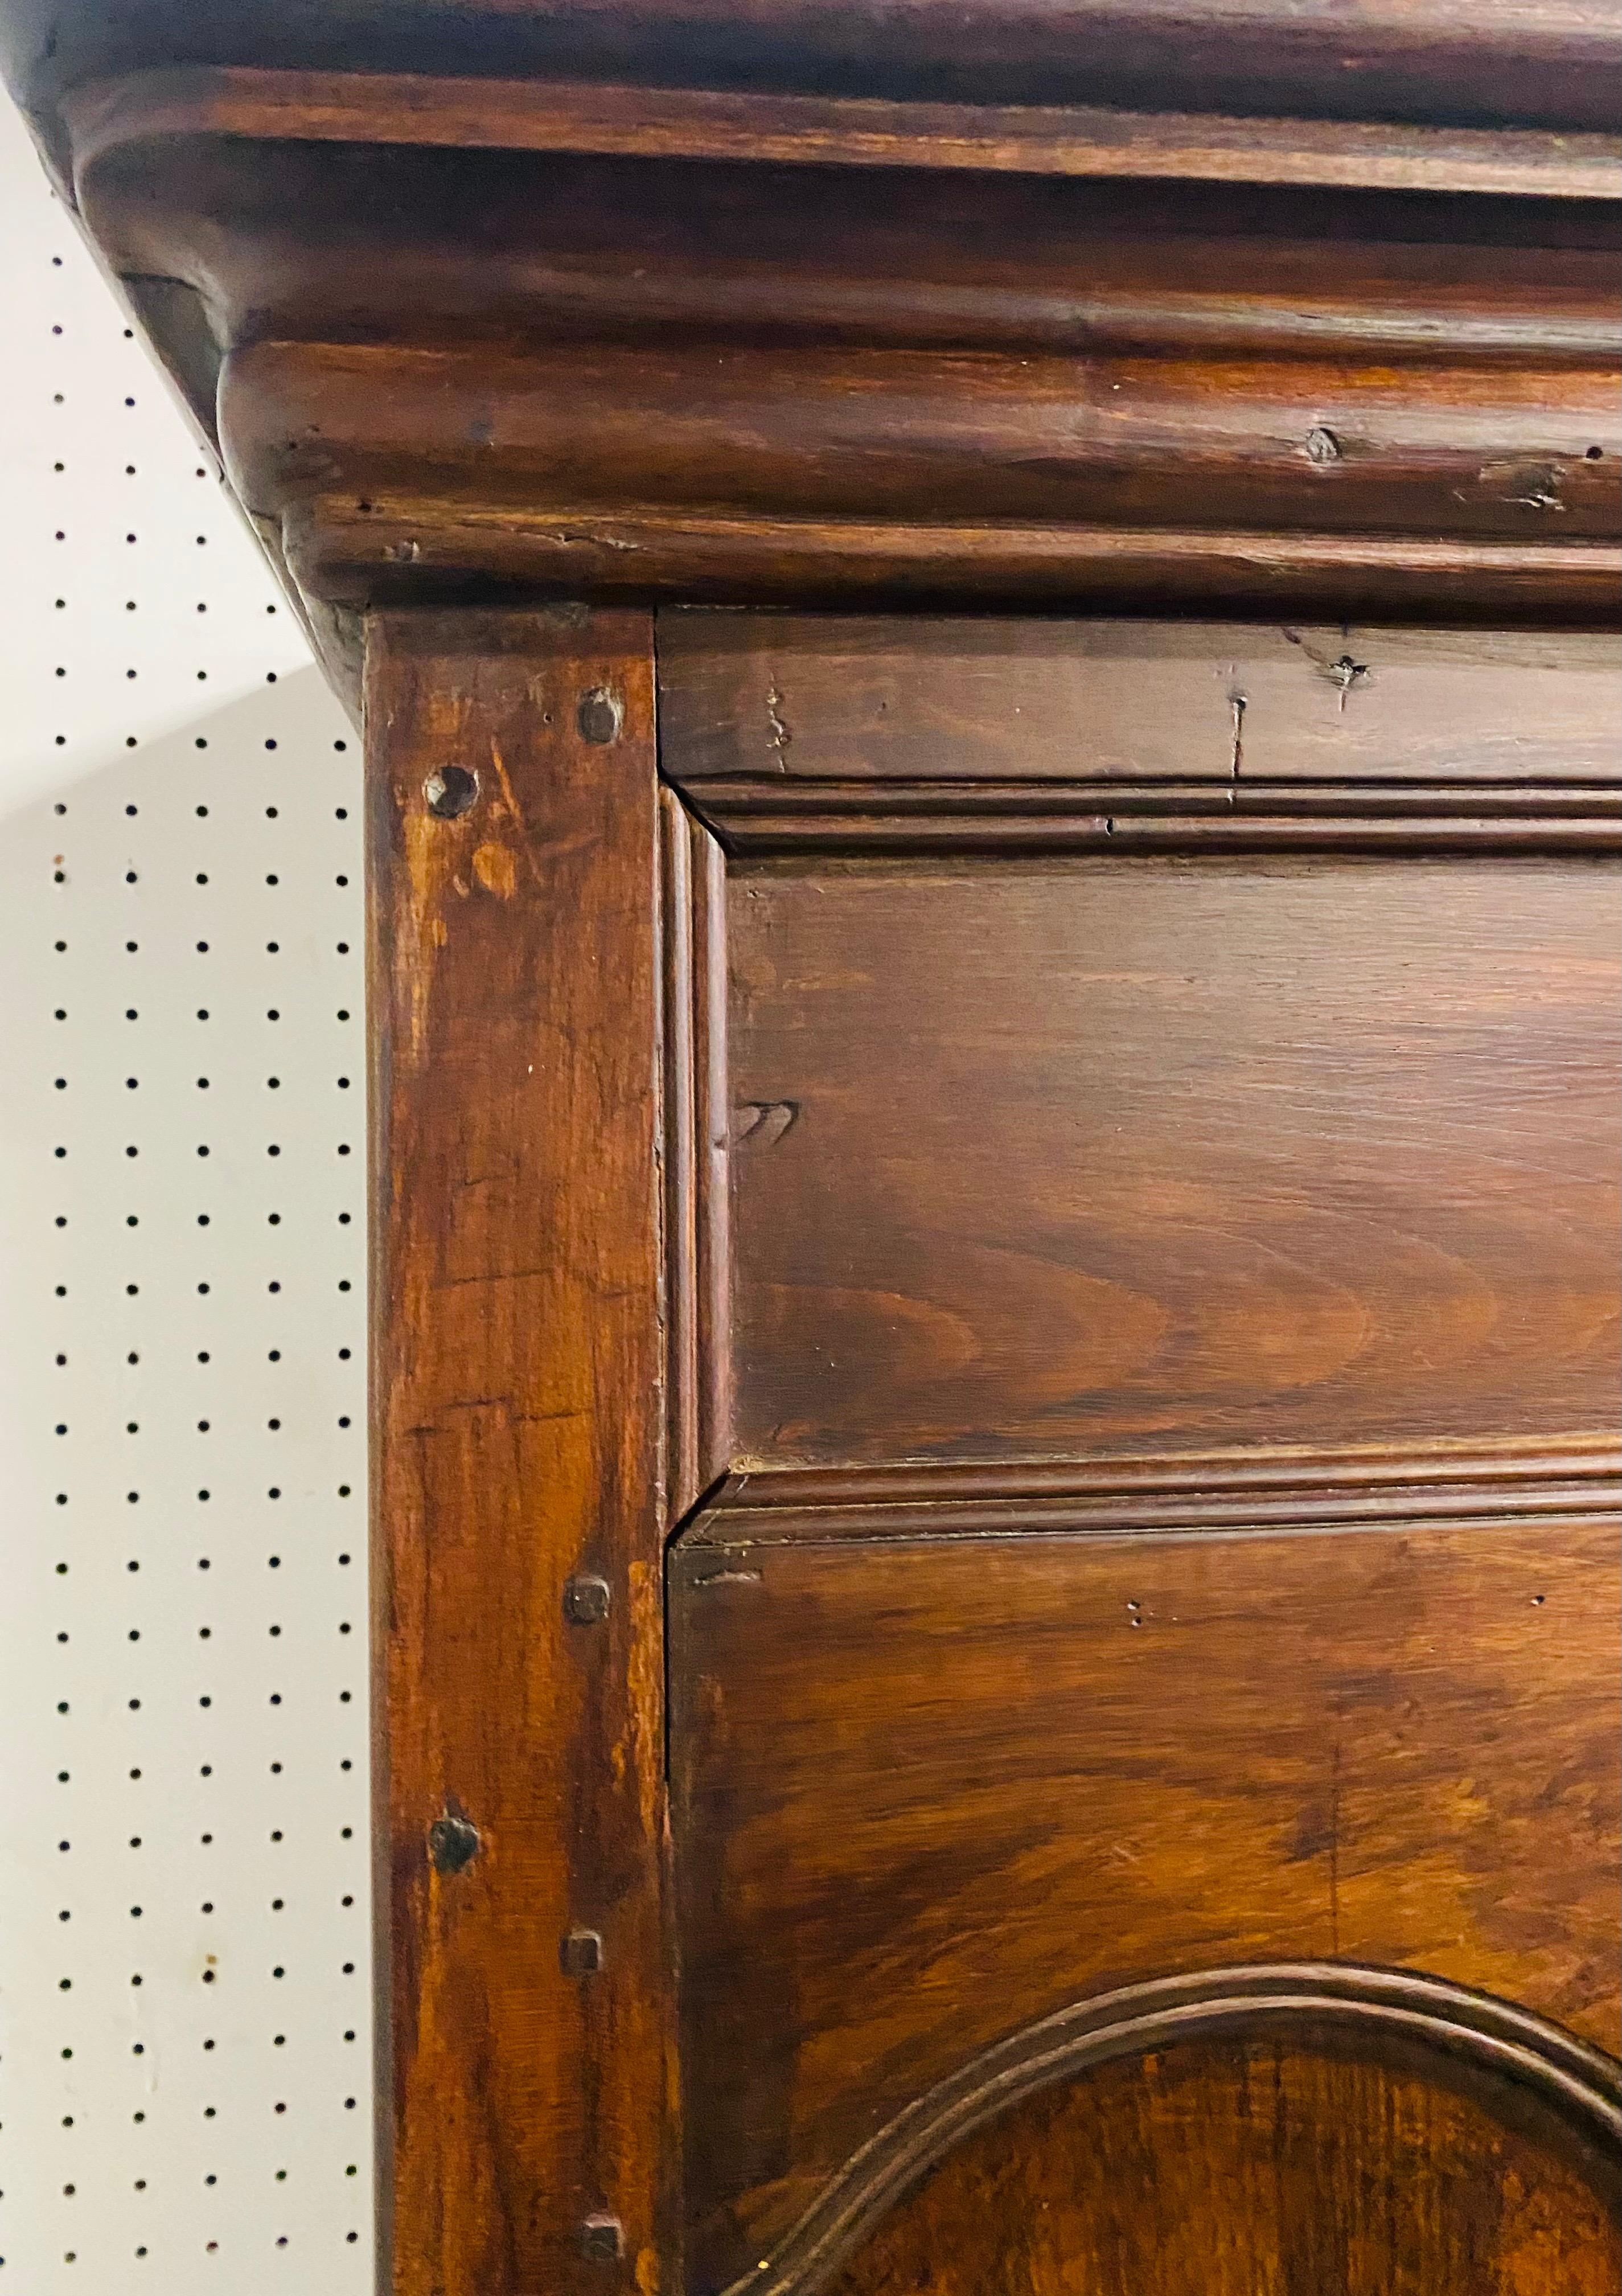 This is an antique late 19th century French country Hand crafted cabinet. This dark walnut hand carved cabinet has beautiful scrollwork at the top with shelves in the center. This cabinet features too small side cabinets on either side with doors